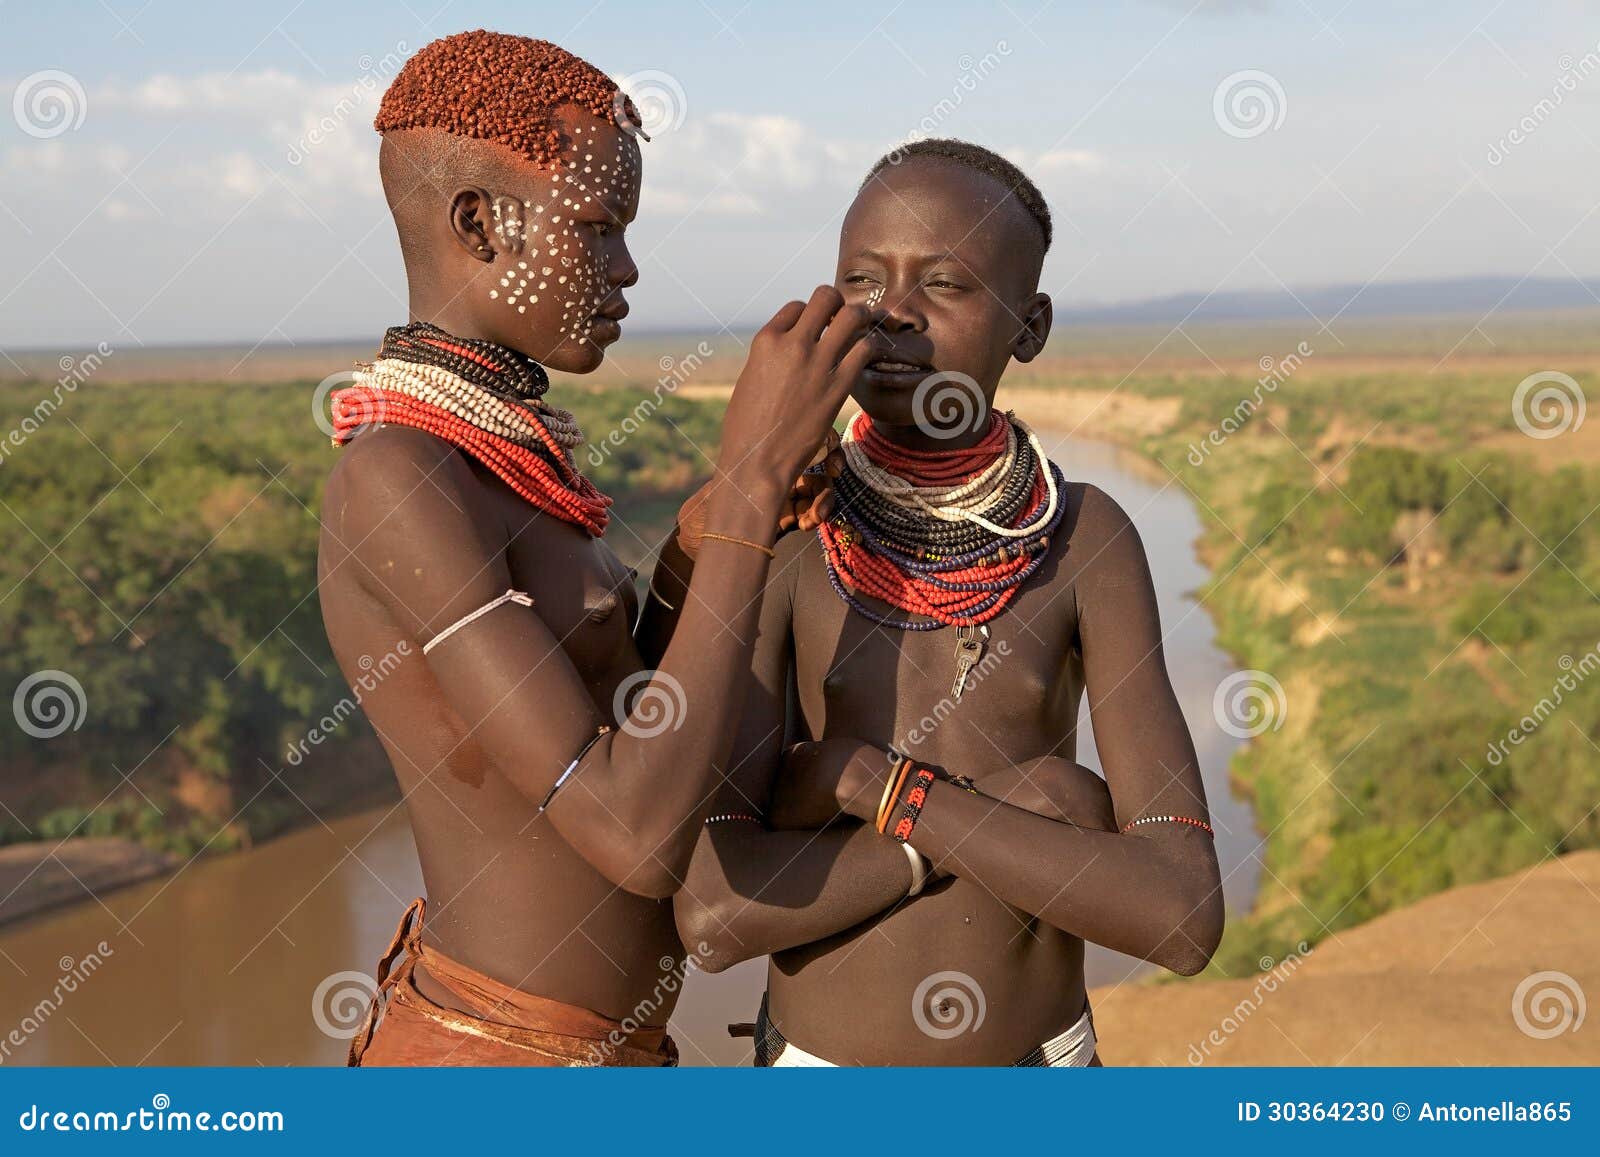 Naked African Tribal Girls the mirror